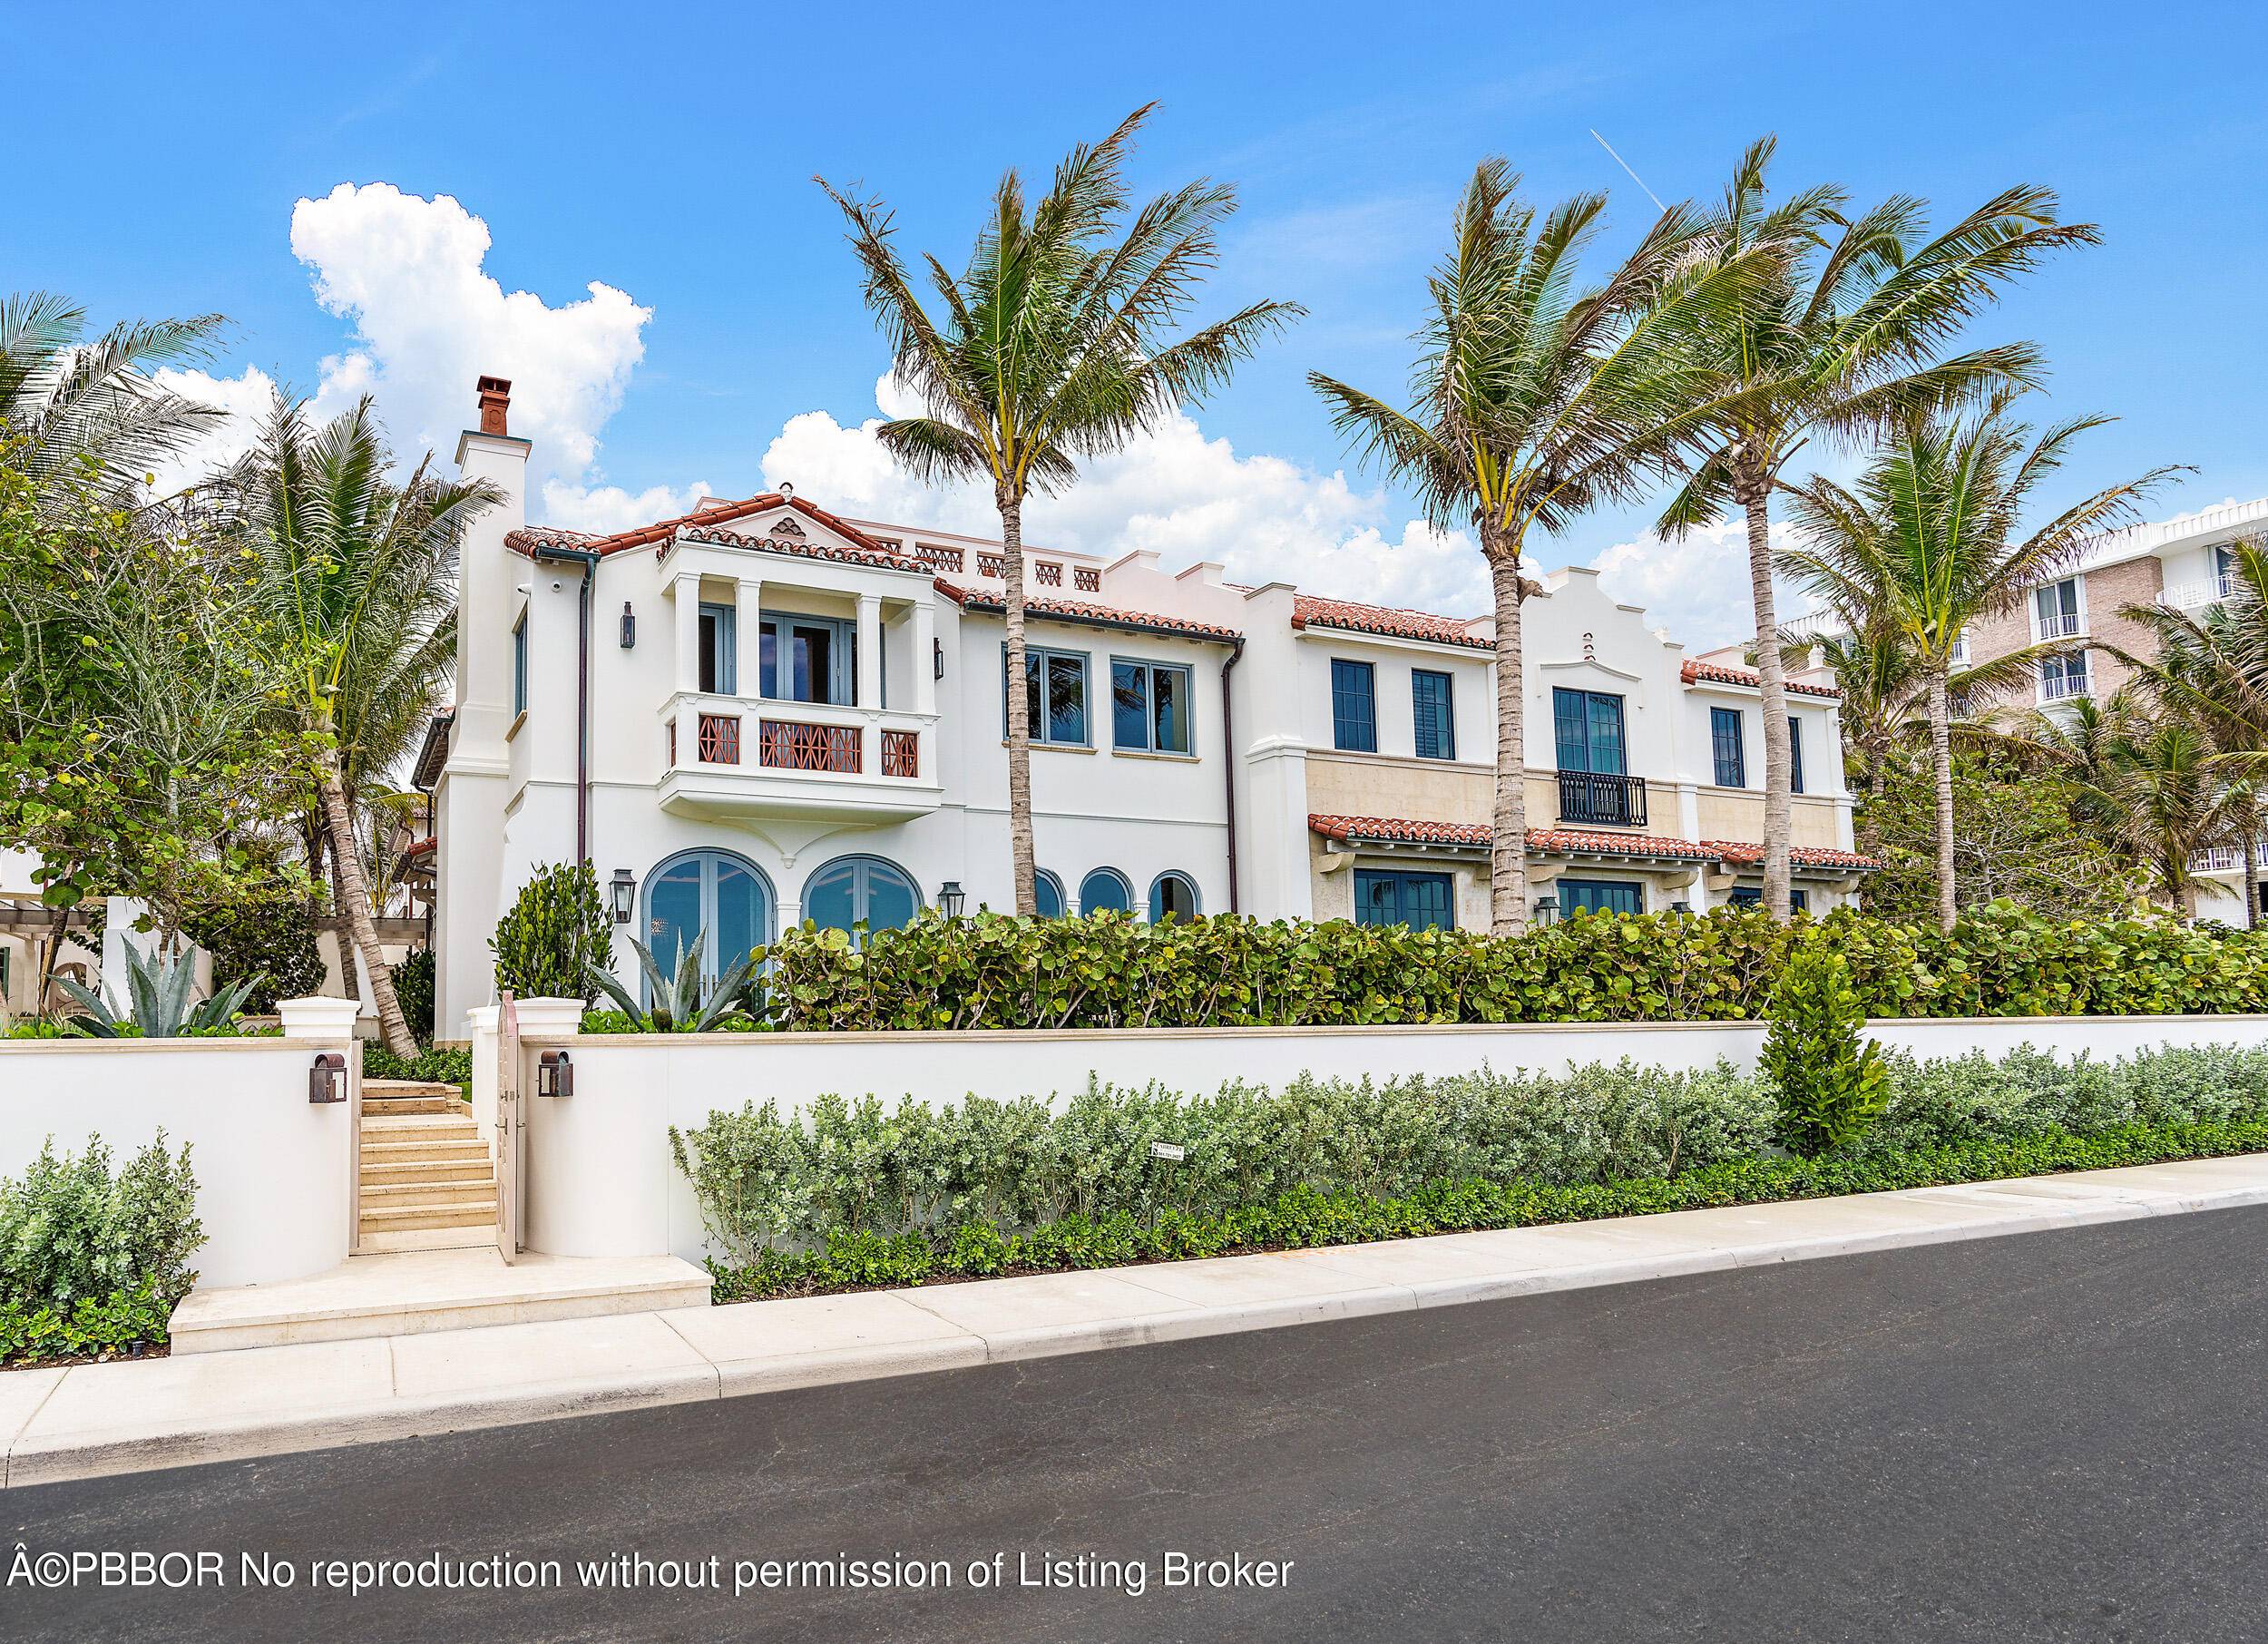 Located in the heart of Palm Beach, 1 block south of Worth Avenue in the prestigious Estate Section.